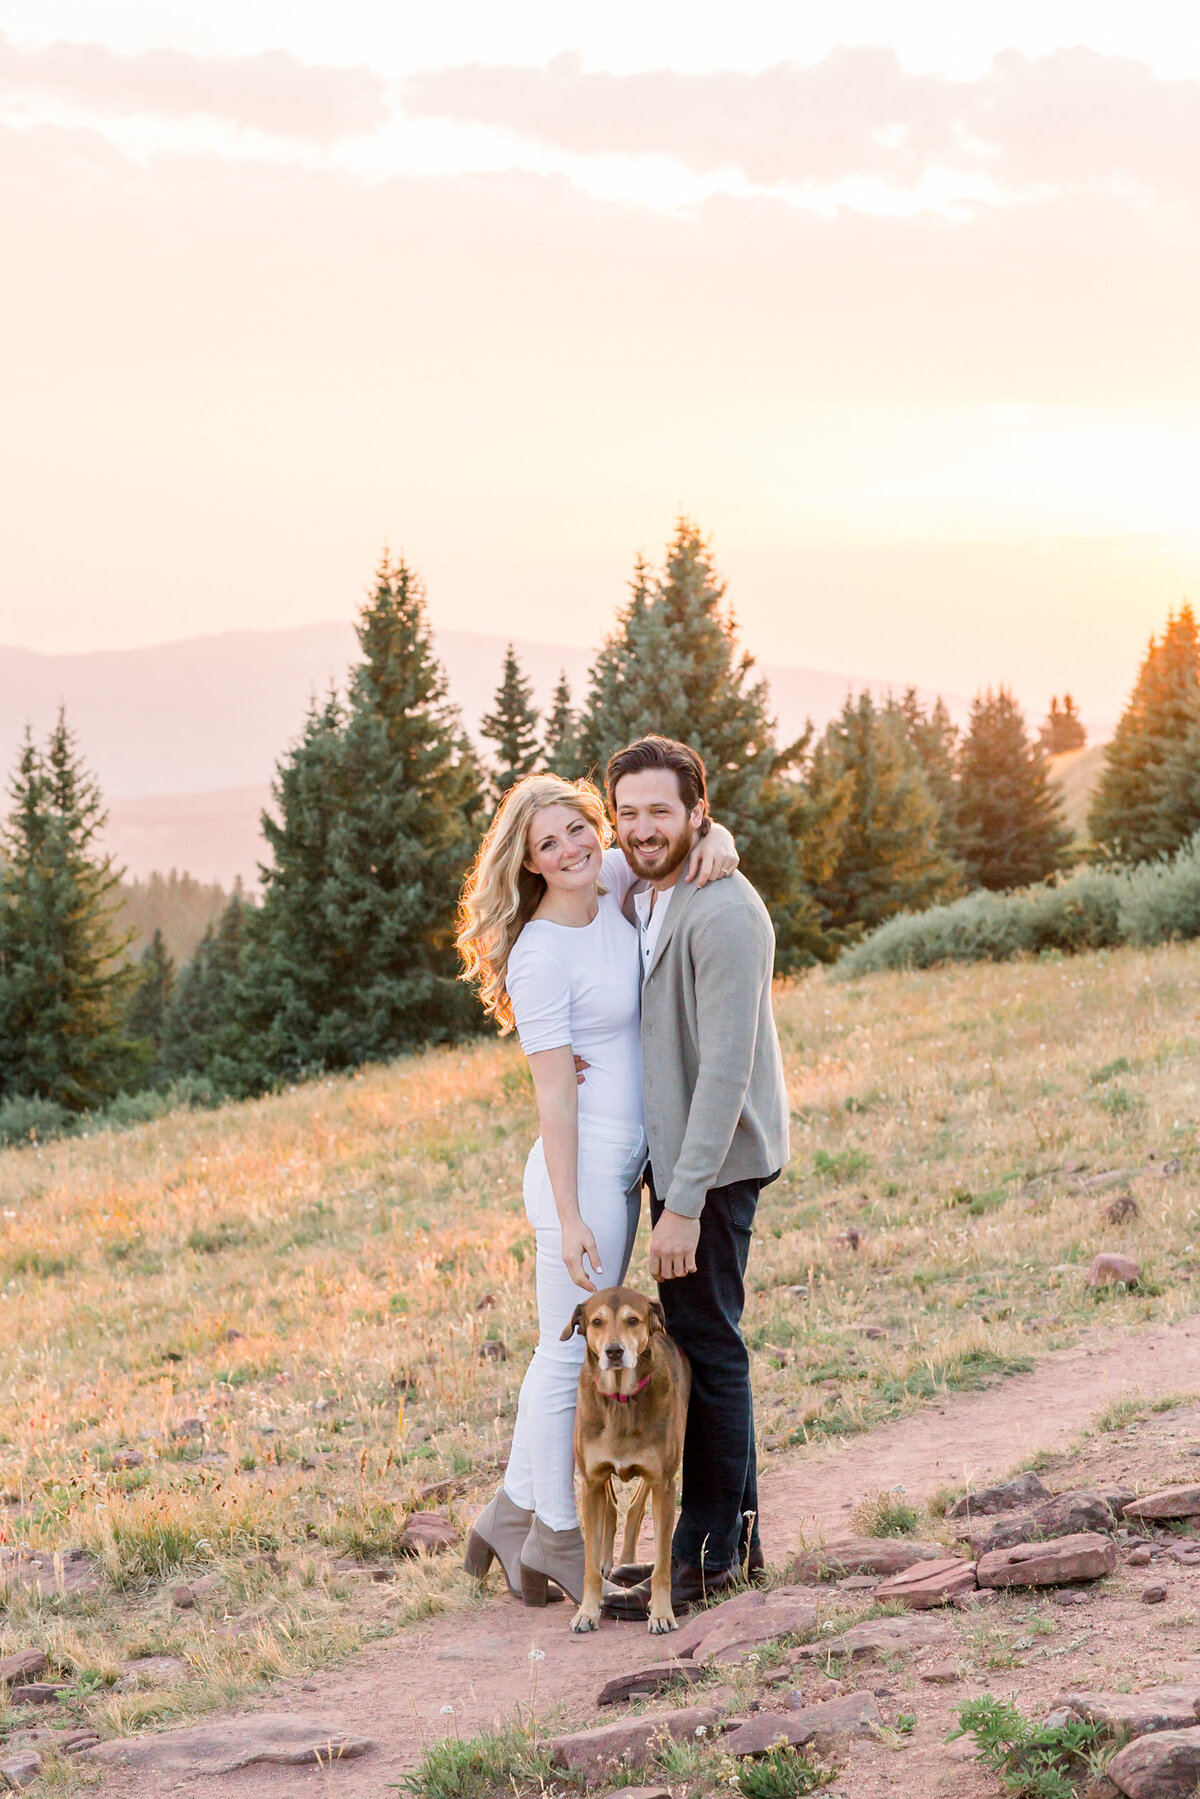 Engaged couple with their dog in Colorado